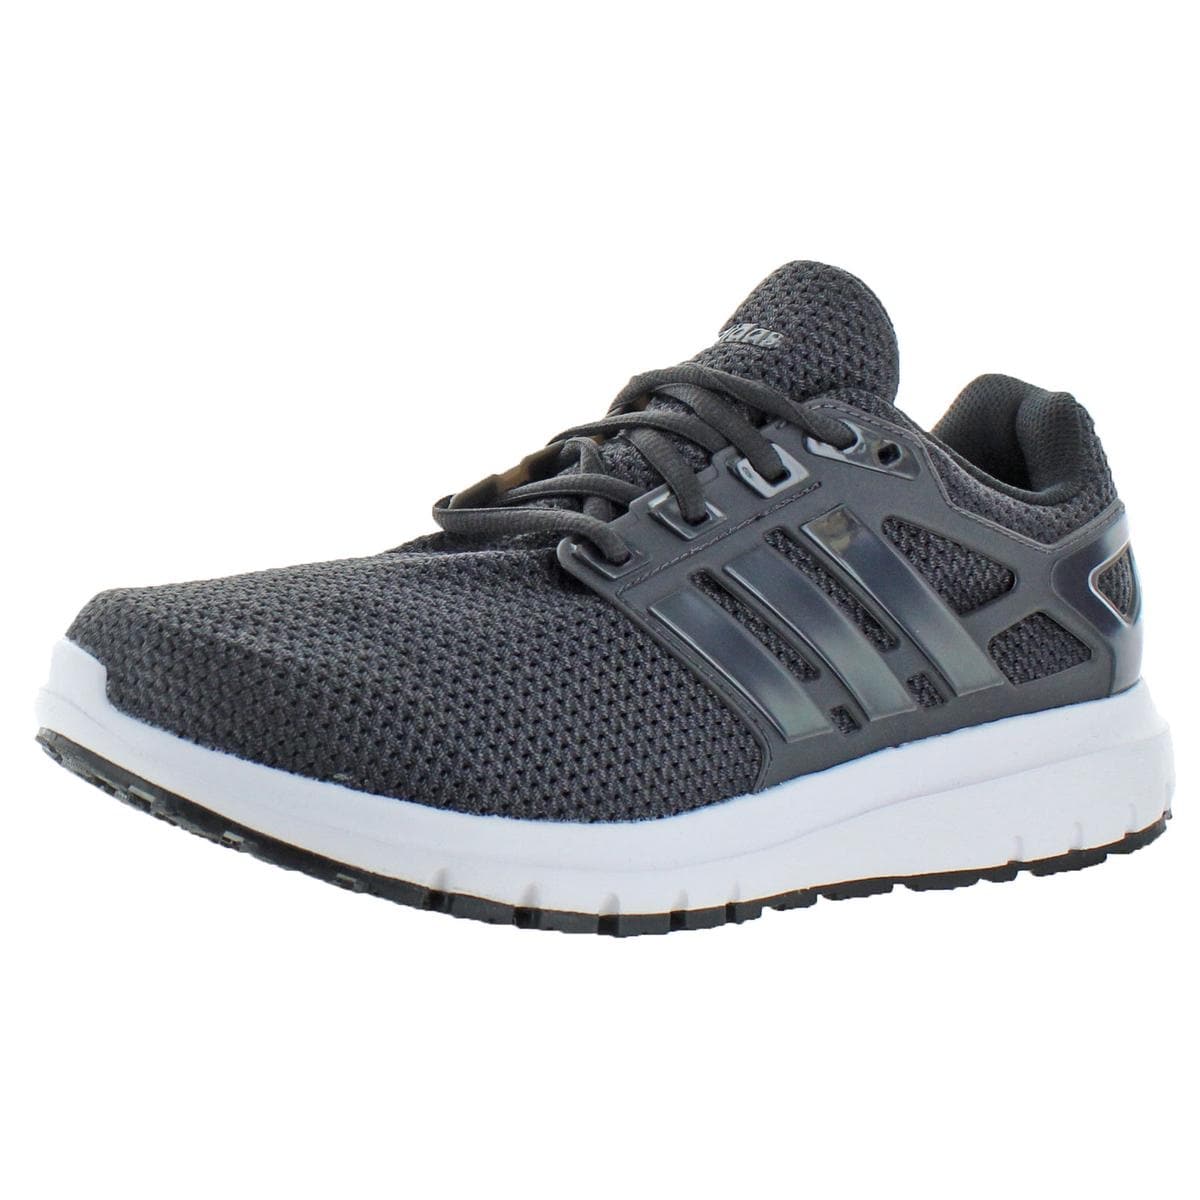 are adidas ortholite float good for running